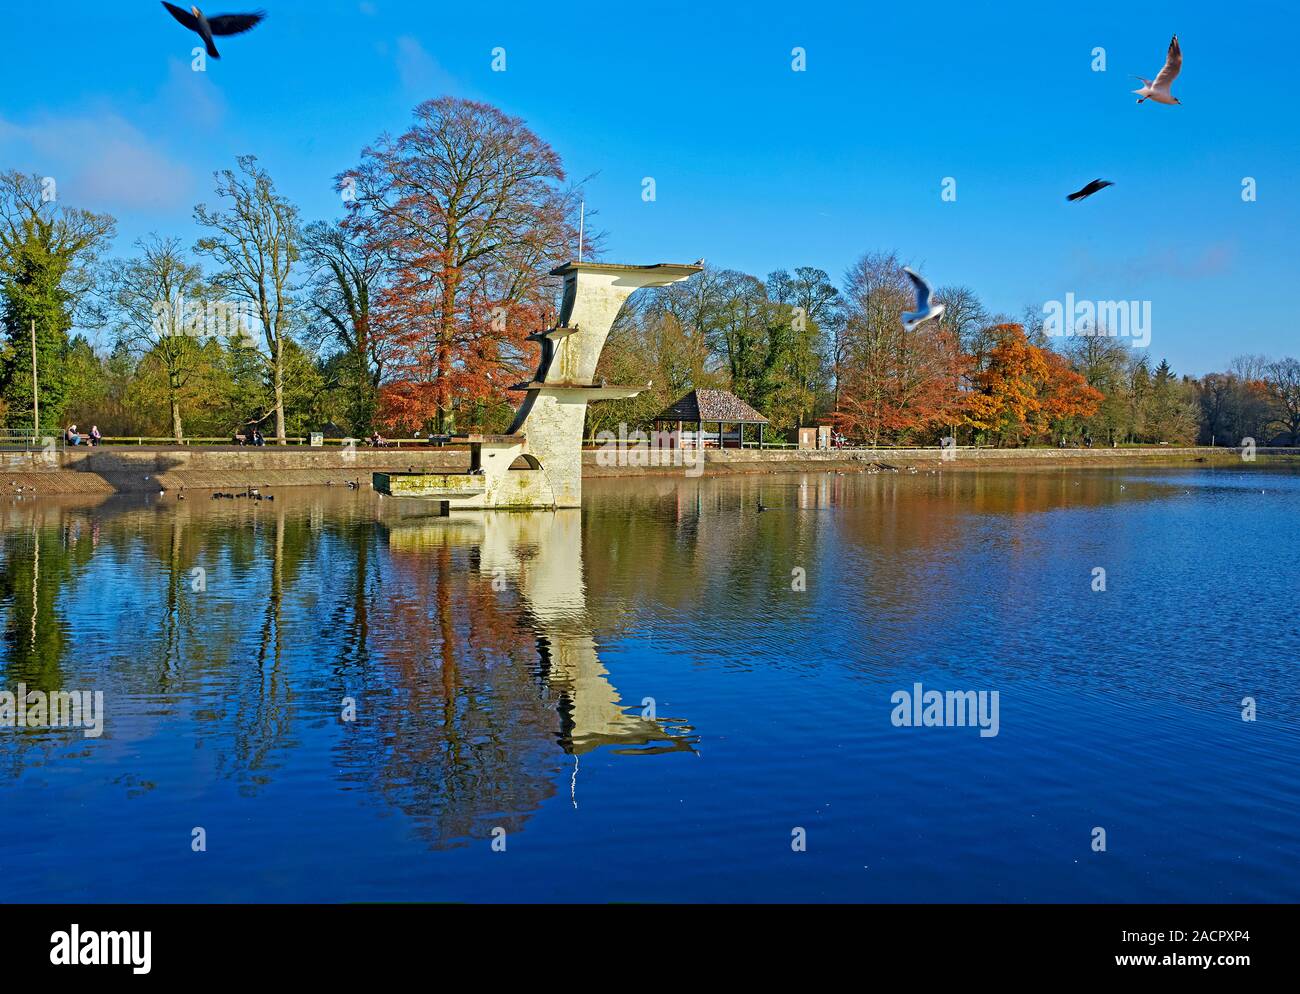 Disused diving board and wild birds on Coate Water public park in Swindon, Wiltshire, UK Stock Photo